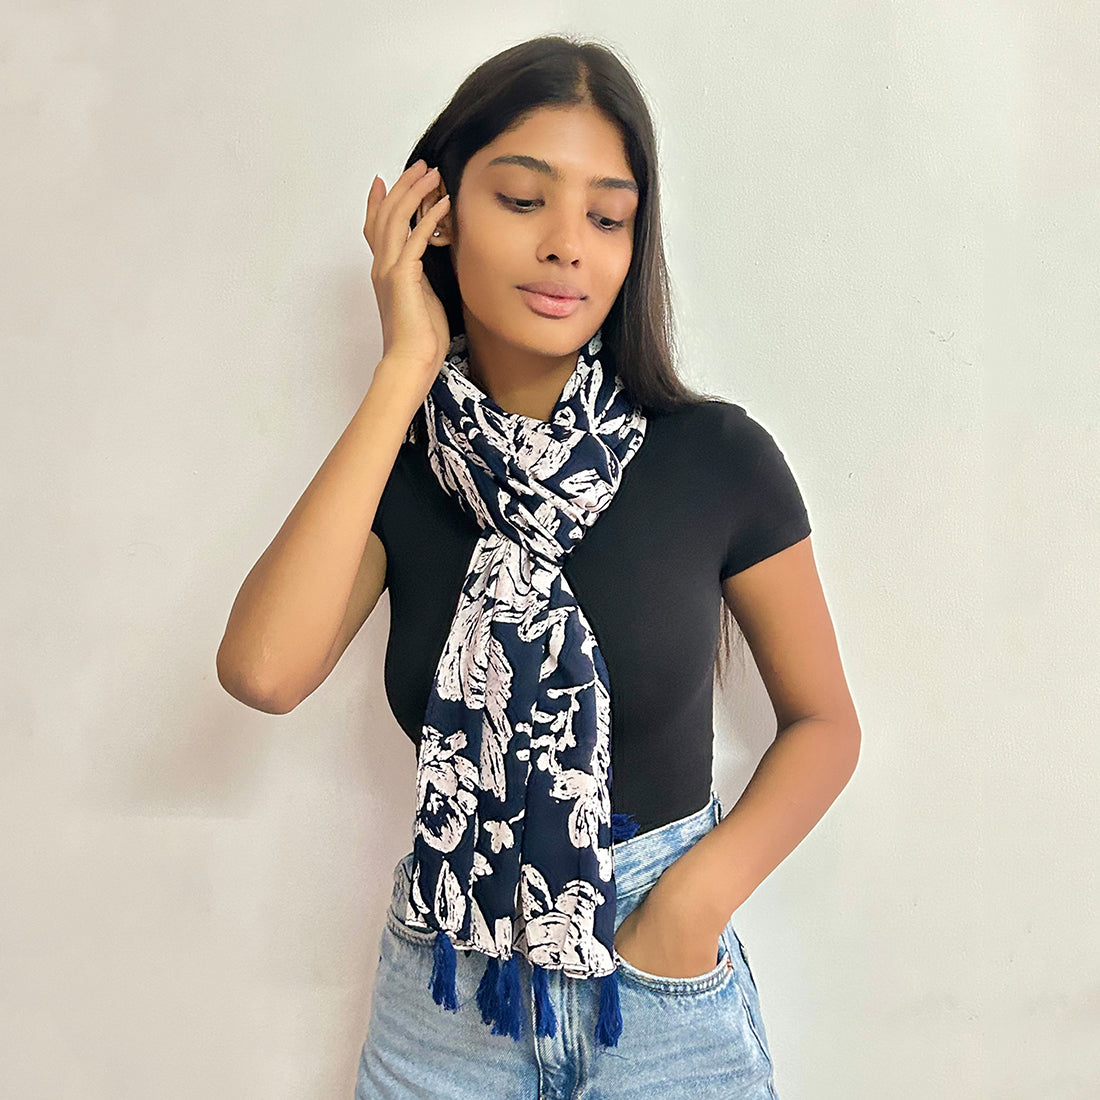 Tropical Green, Navy Blue & Off-White Palm Leaves Printed Modal Tassel Scarf